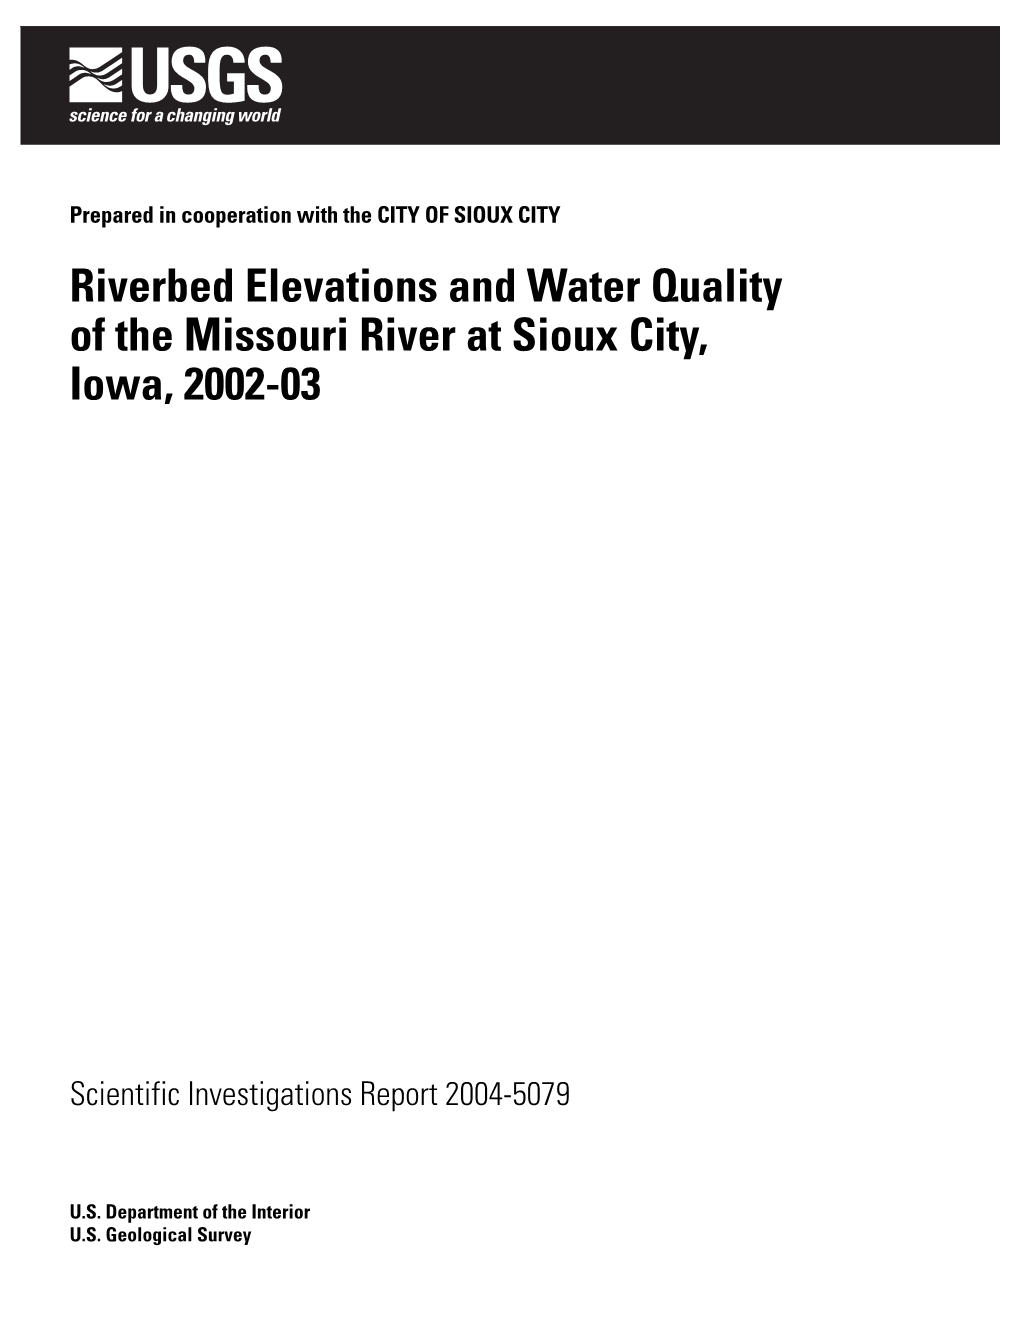 Riverbed Elevations and Water Quality of the Missouri River at Sioux City, Iowa, 2002-03